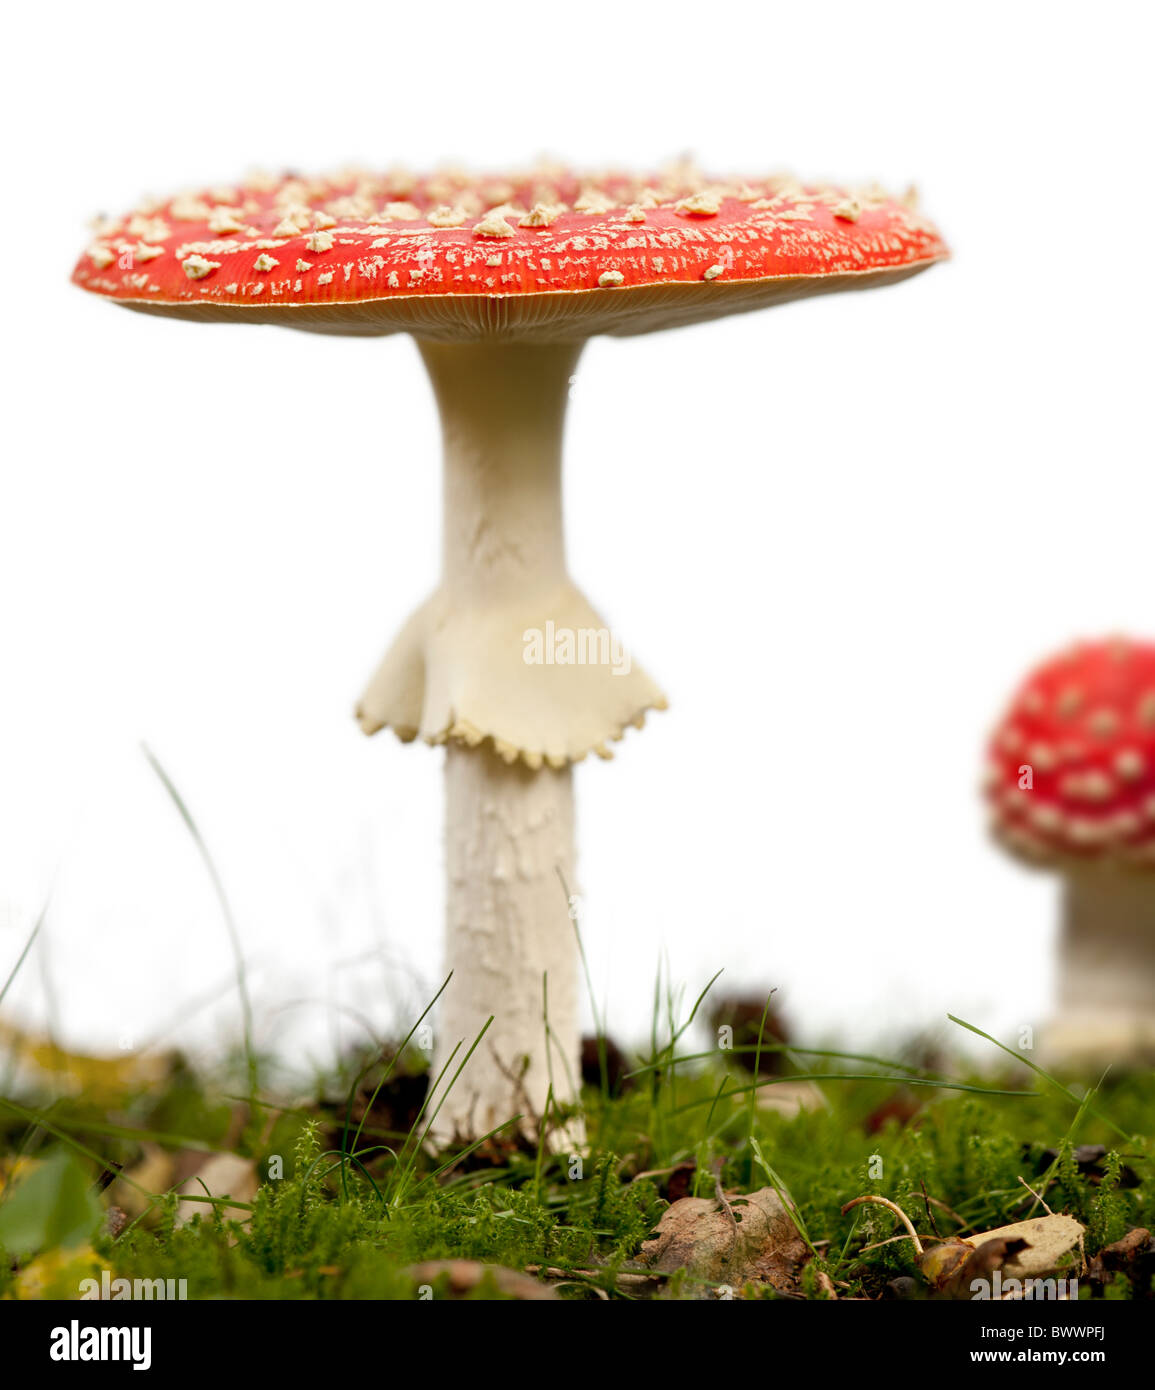 Fly agaric or fly Amanita mushrooms, Amanita muscaria, in front of white background Stock Photo